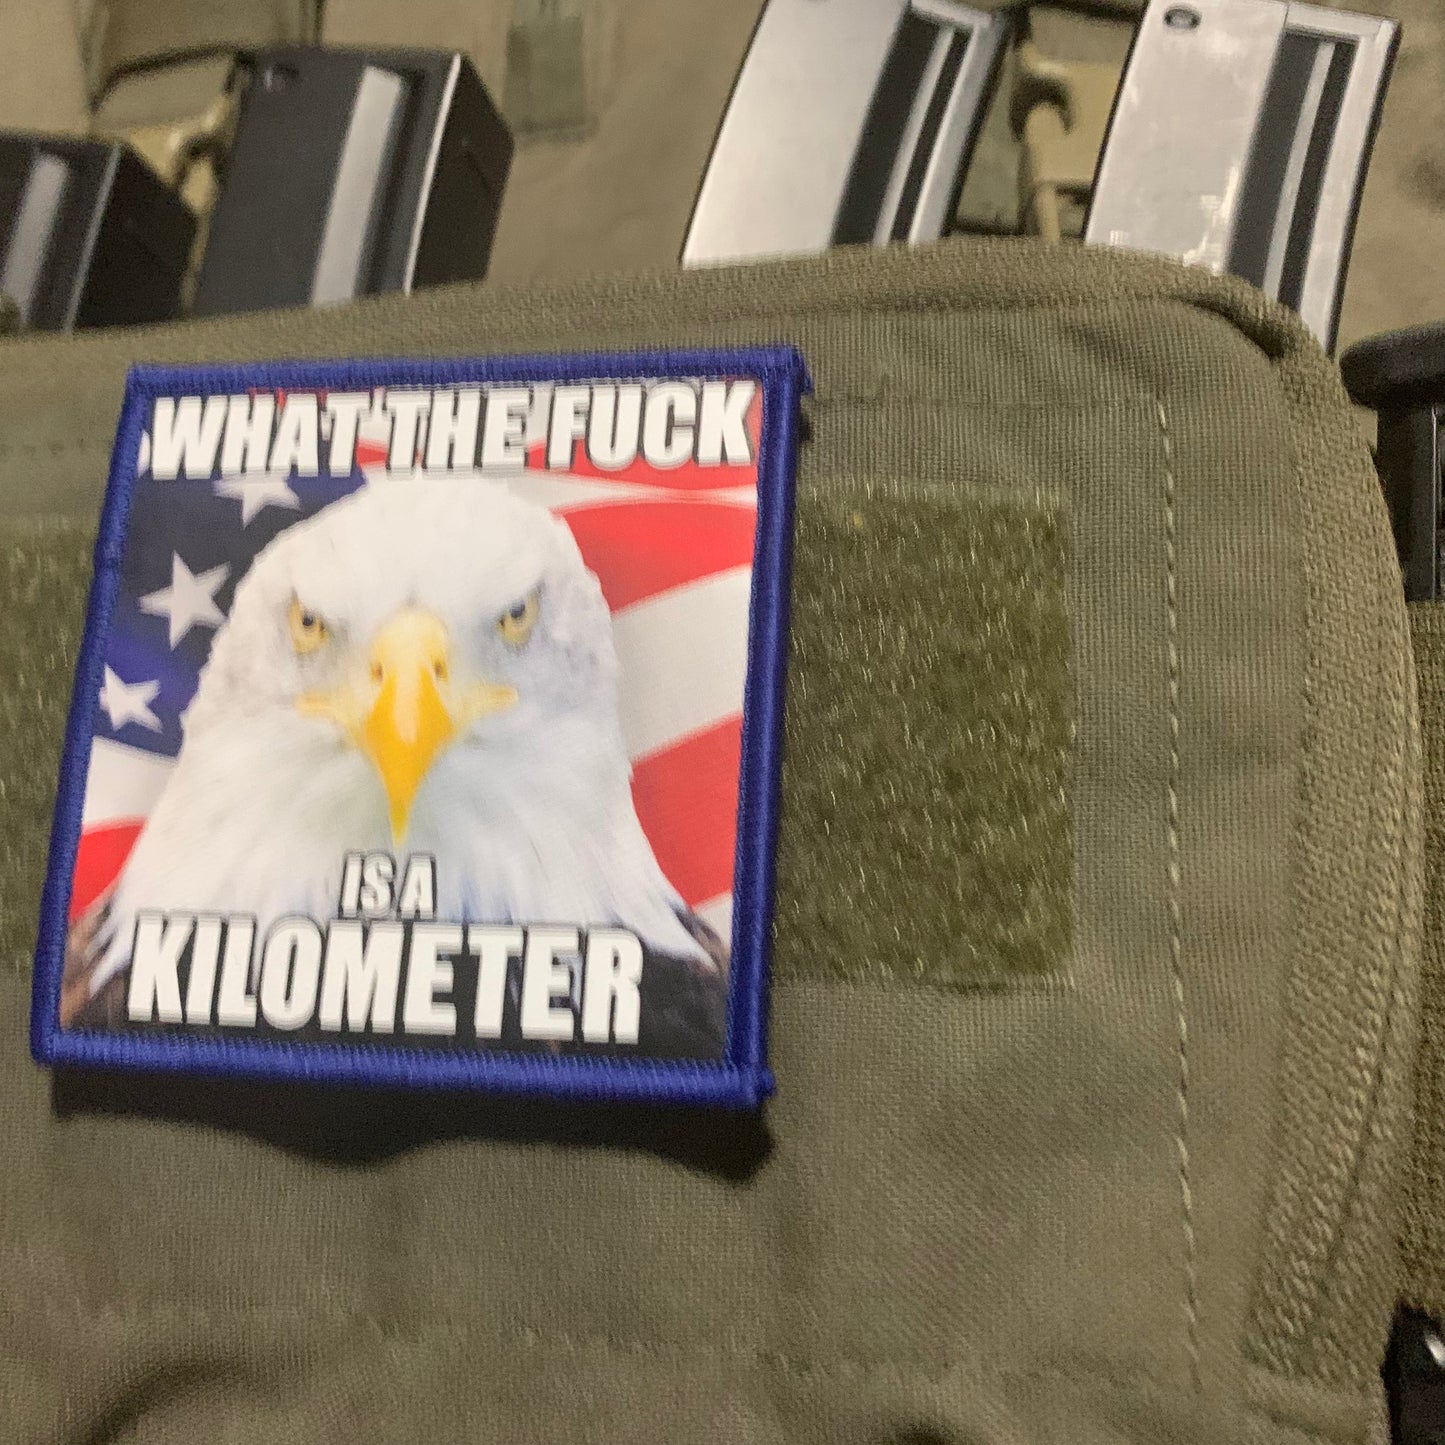 What The Fuck Is a Kilometer Bald Eagle Patch